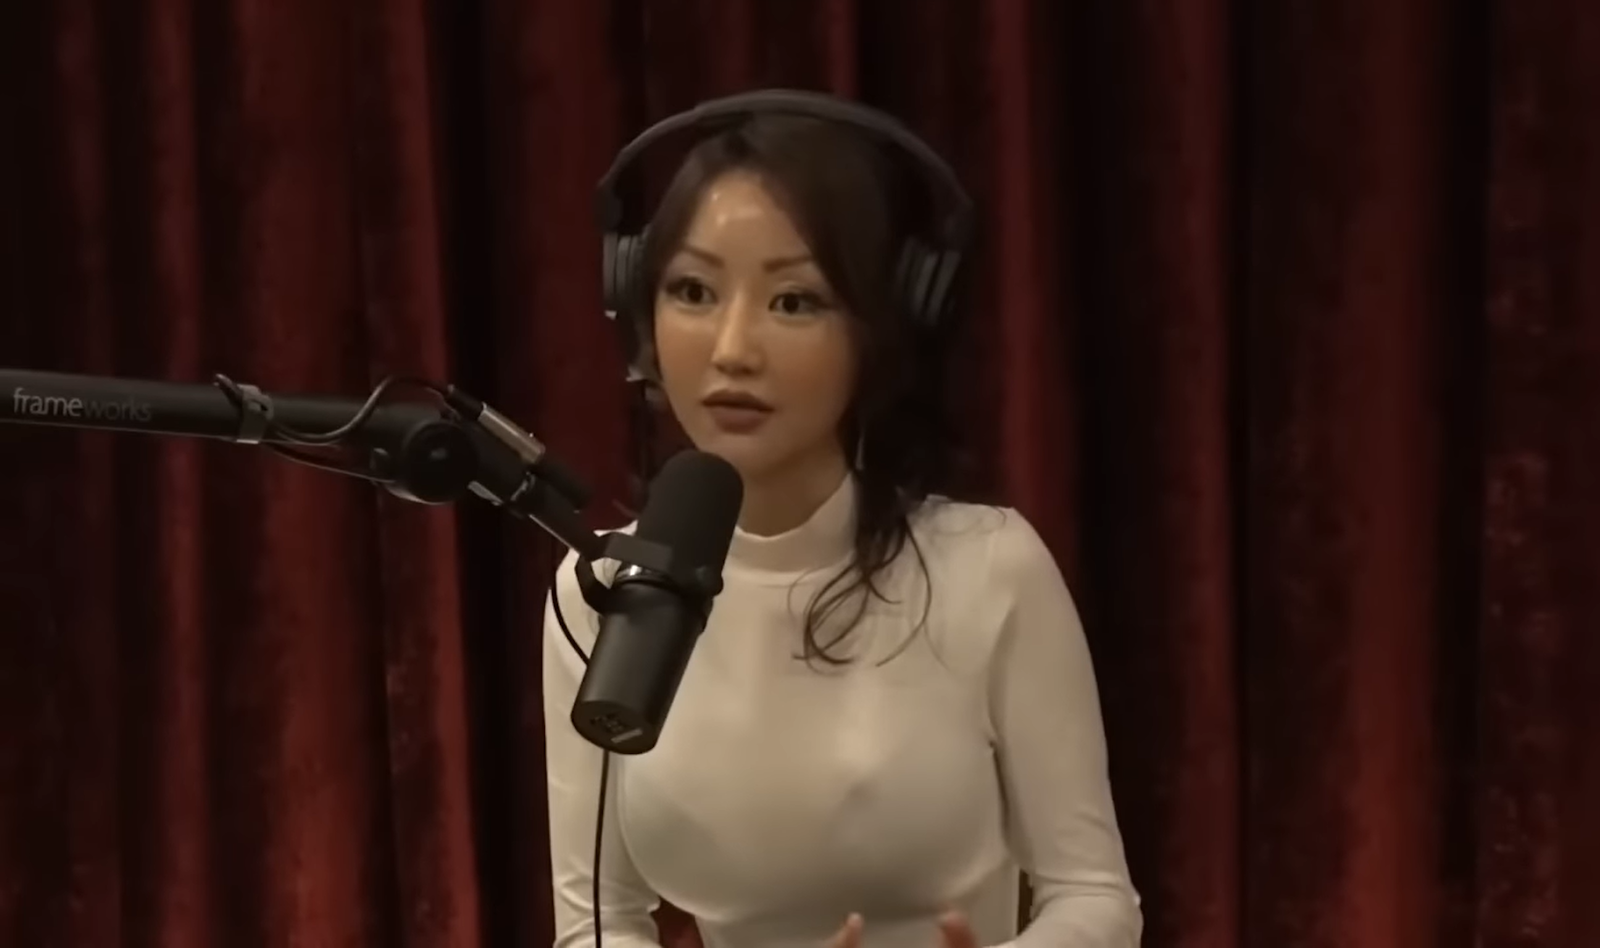 Yeonmi Park sitting in front of velour red curtains near the microphone